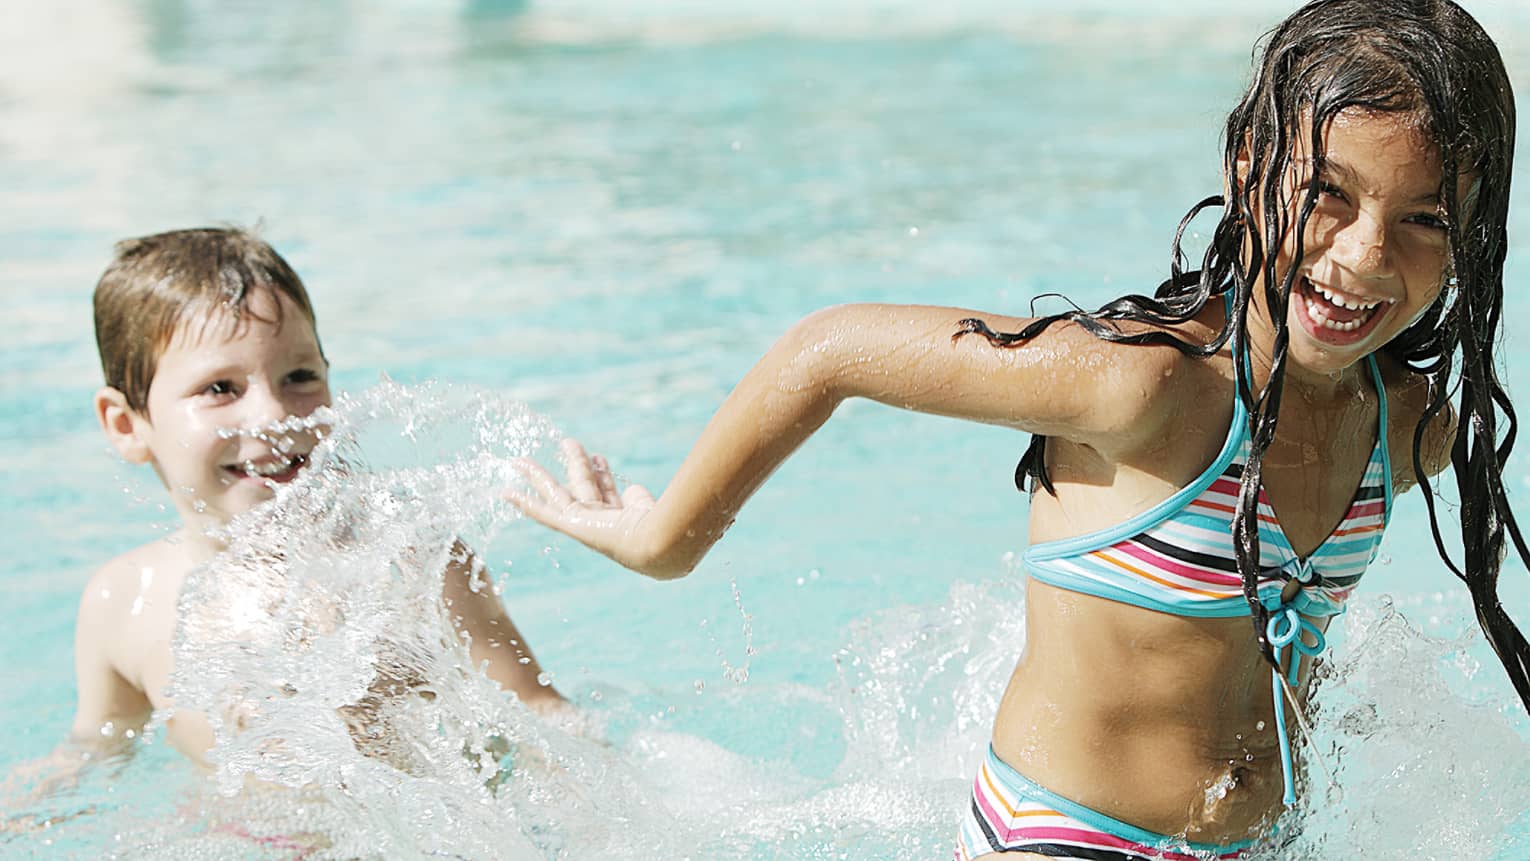 Laughing girl in swimsuit plays in swimming pool, splashes smiling boy